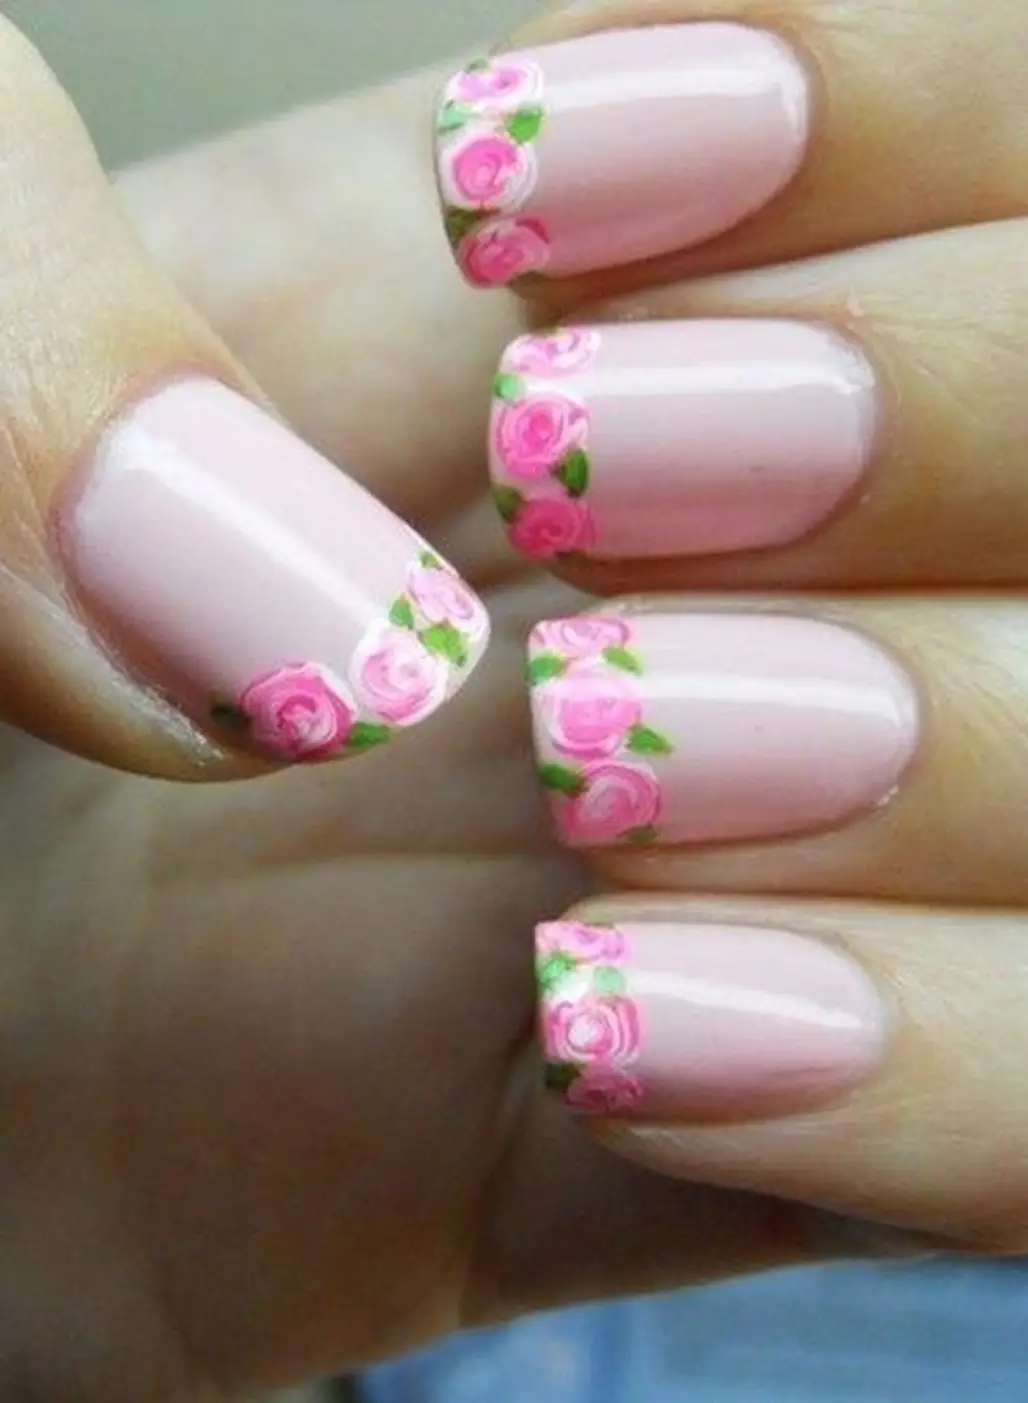 Fun with Florals